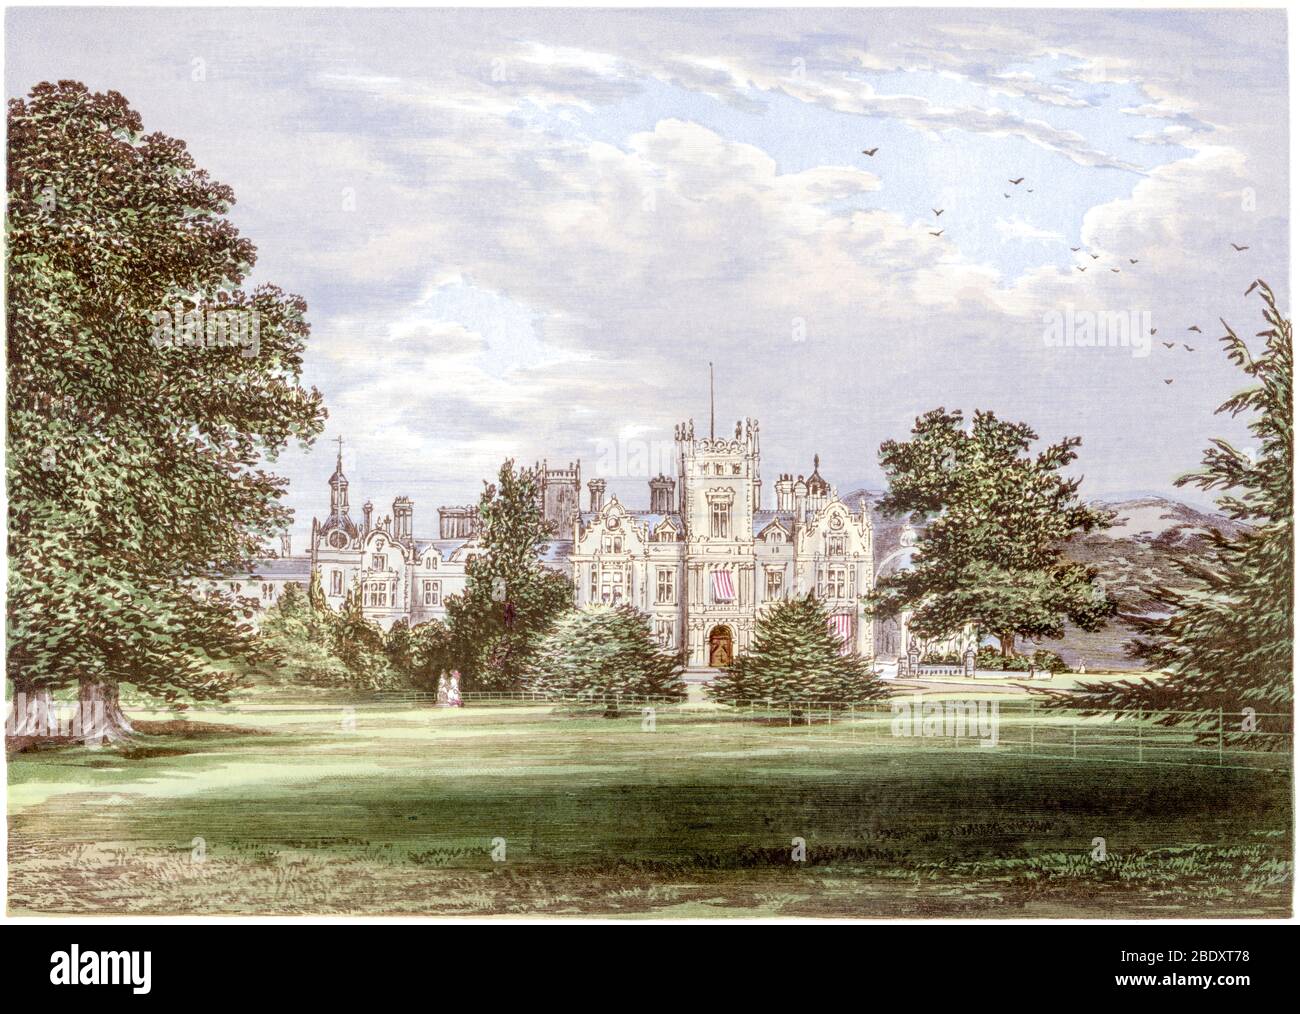 A coloured illustration of Preston Hall near Aylesford, Kent scanned at high resolution from a book printed in 1870.  Believed copyright free. Stock Photo